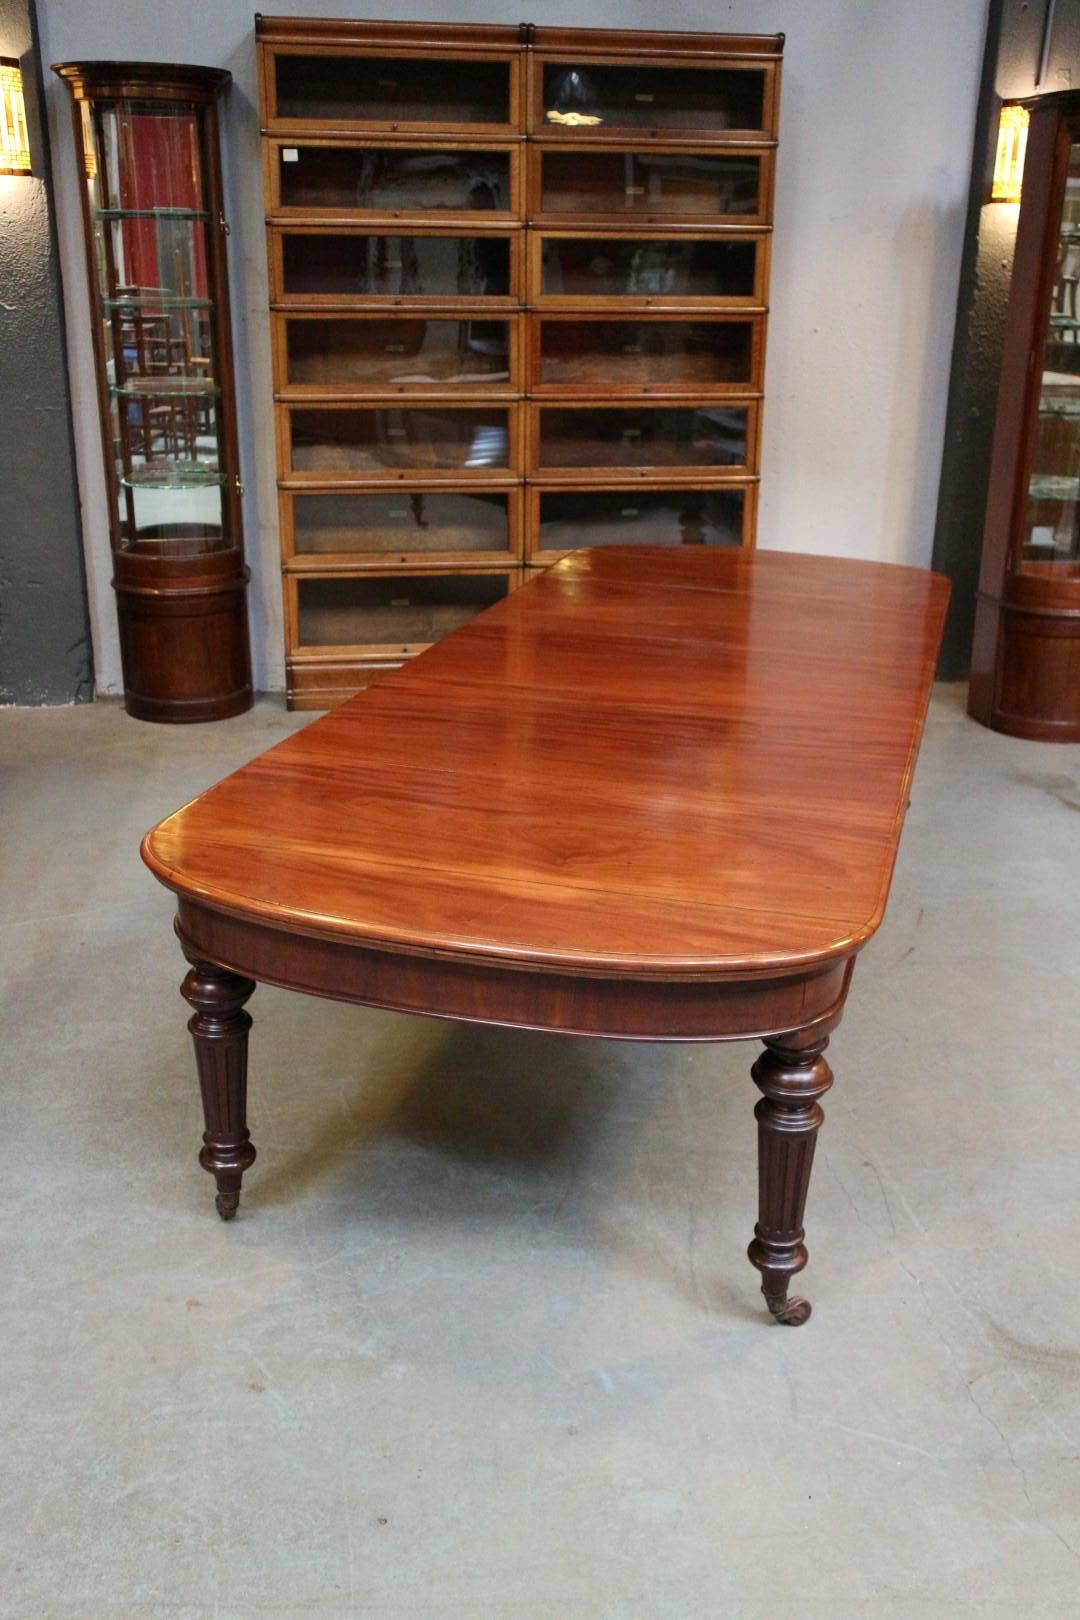 Antique mahogany dining room table with 3 original leaves. Entirely in good and original condition. Due to the extra blades, different lengths are possible. by means of a wind out system you can open the table to put leaves in . The table is